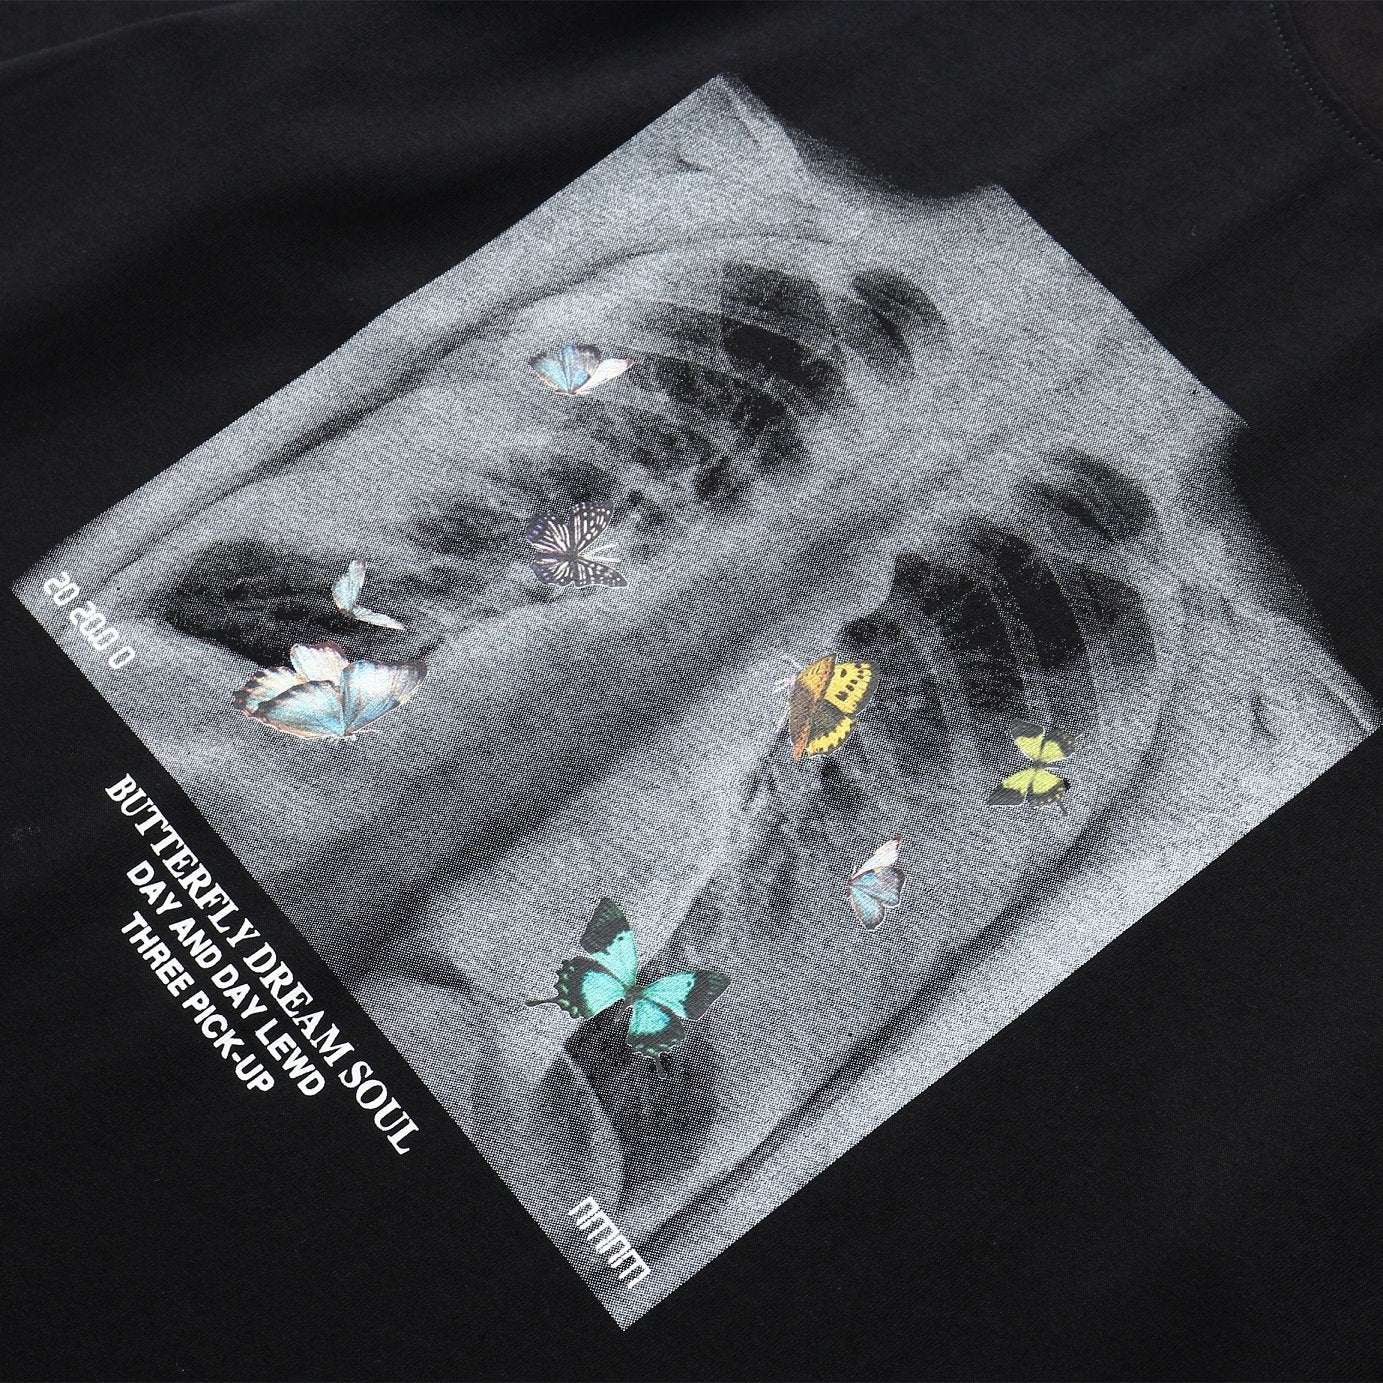 JUSTNOTAG X-ray Chest Perspective Short Sleeve Tee